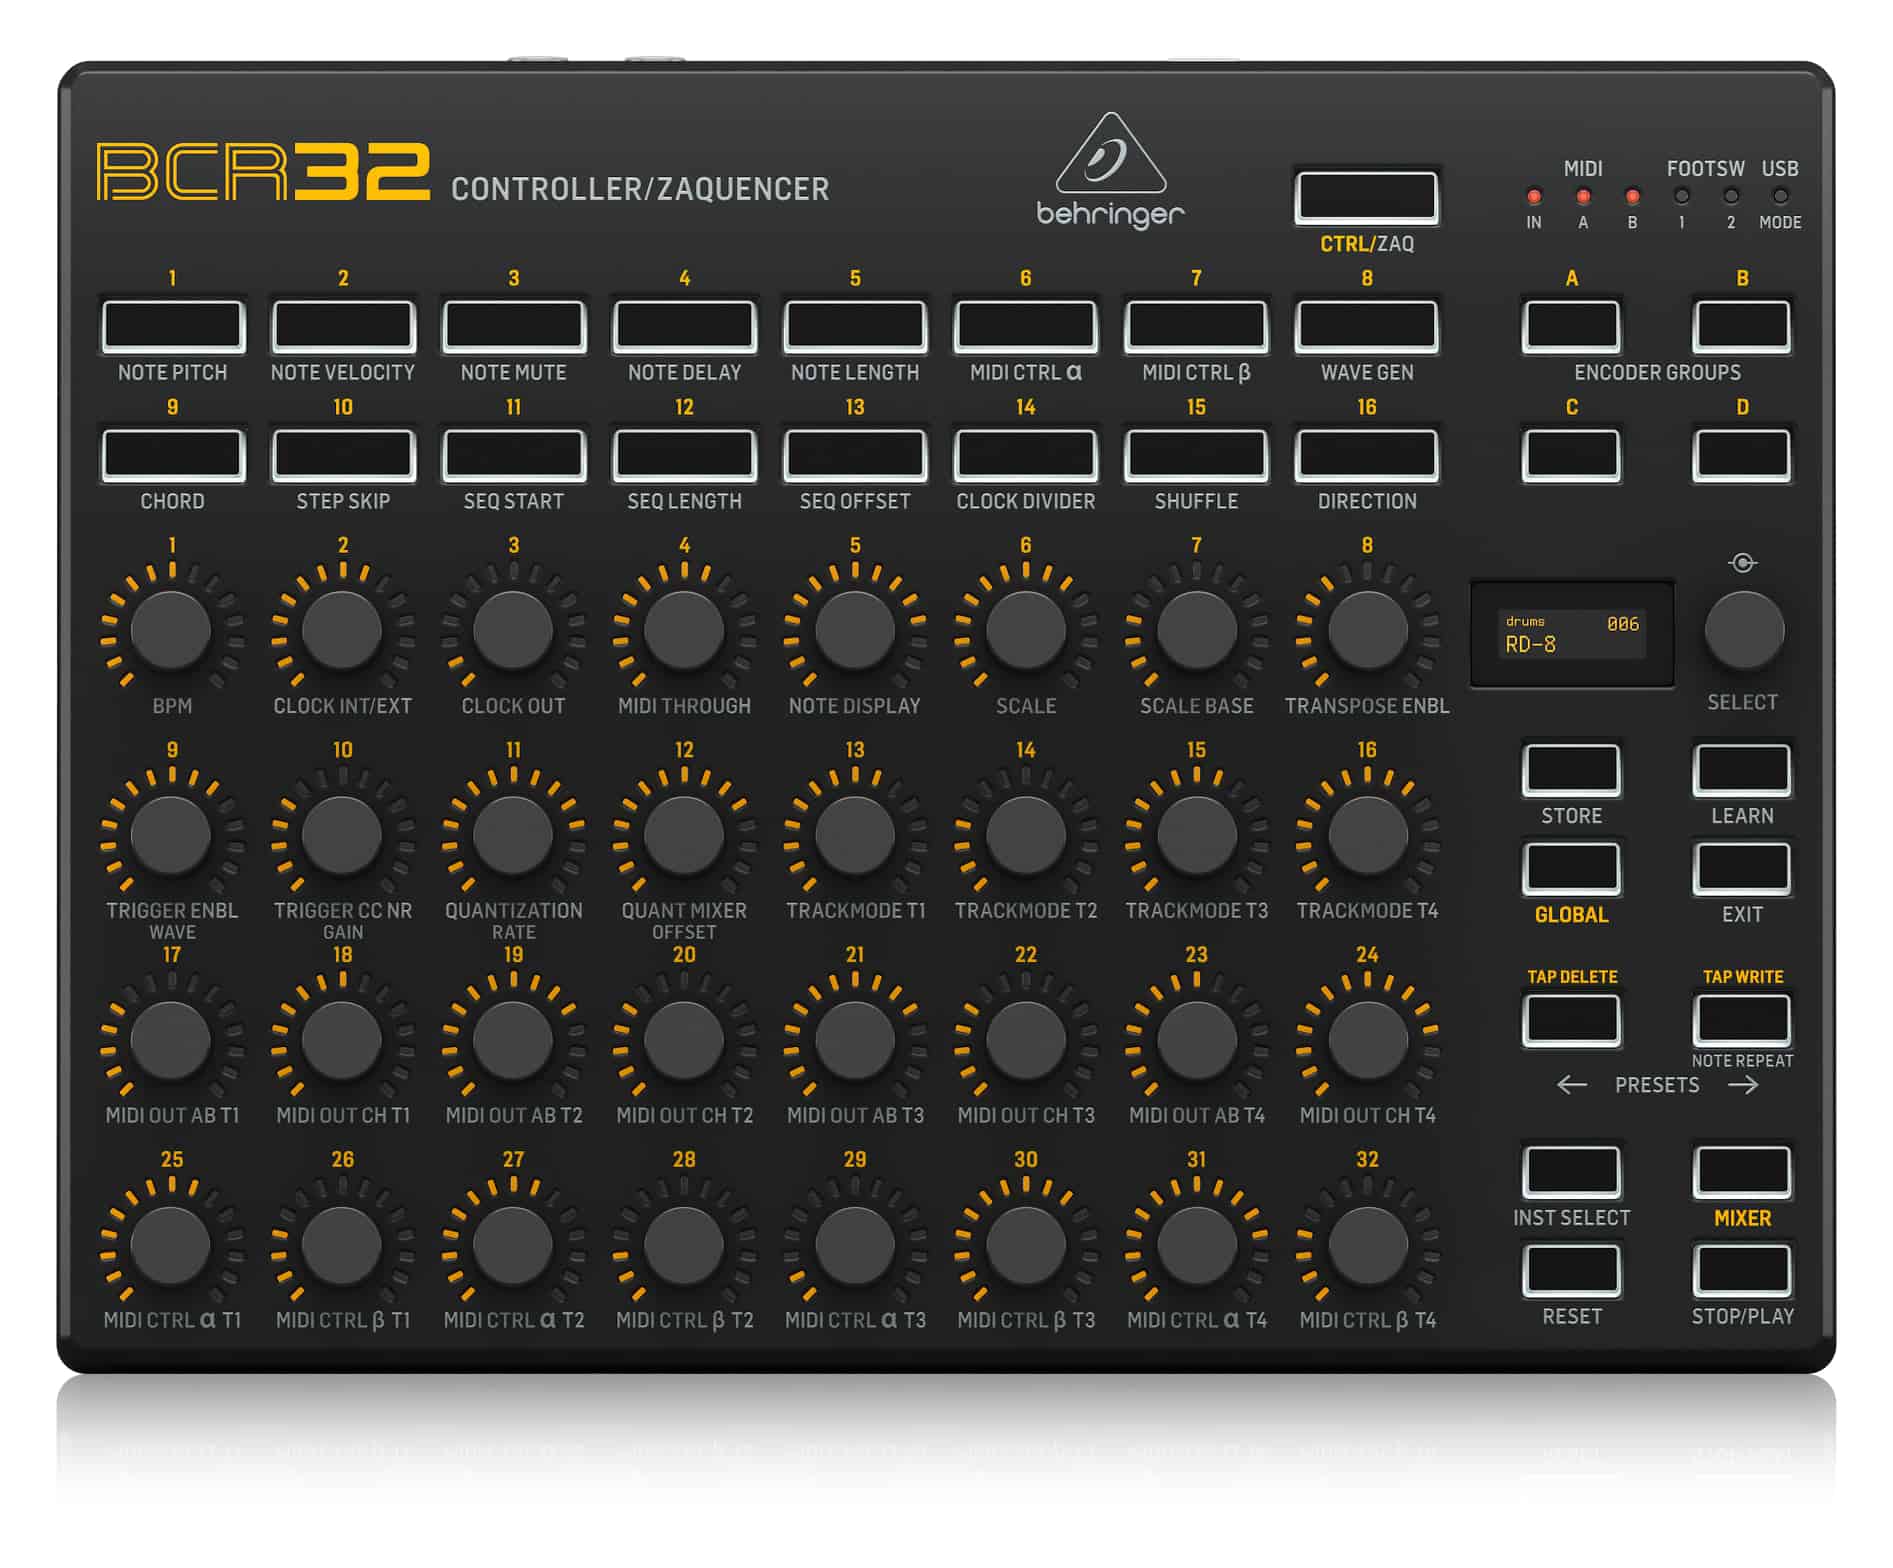 Behringer-Looming-BCR32-USB-MIDI-Controller-Sequencer-